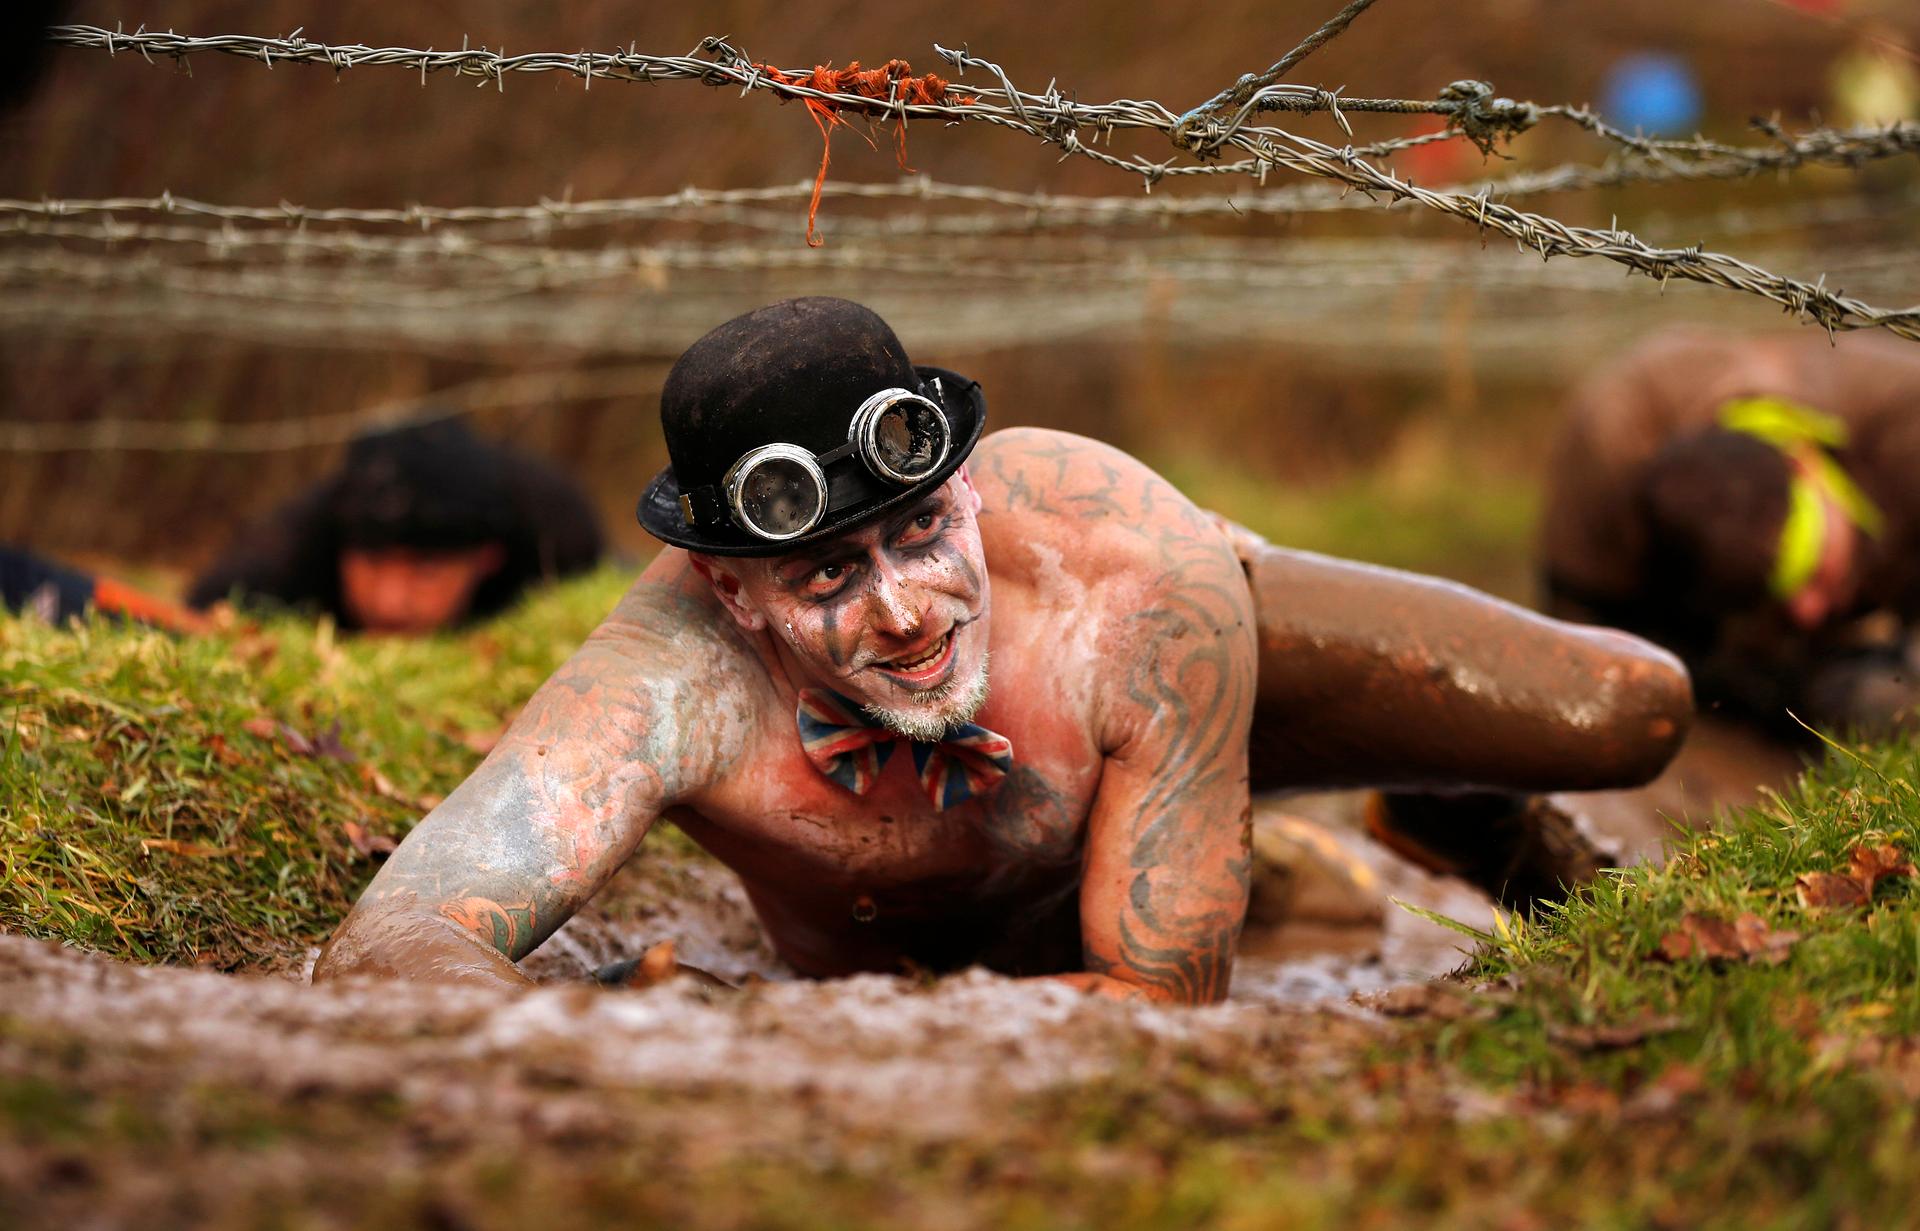 A competitor crawls beneath barbed wire during the Tough Guy event in Perton, central England February 1, 2015. The annual event to raise cash for charity challenges thousands of international competitors in a cross country run followed by an assault cour